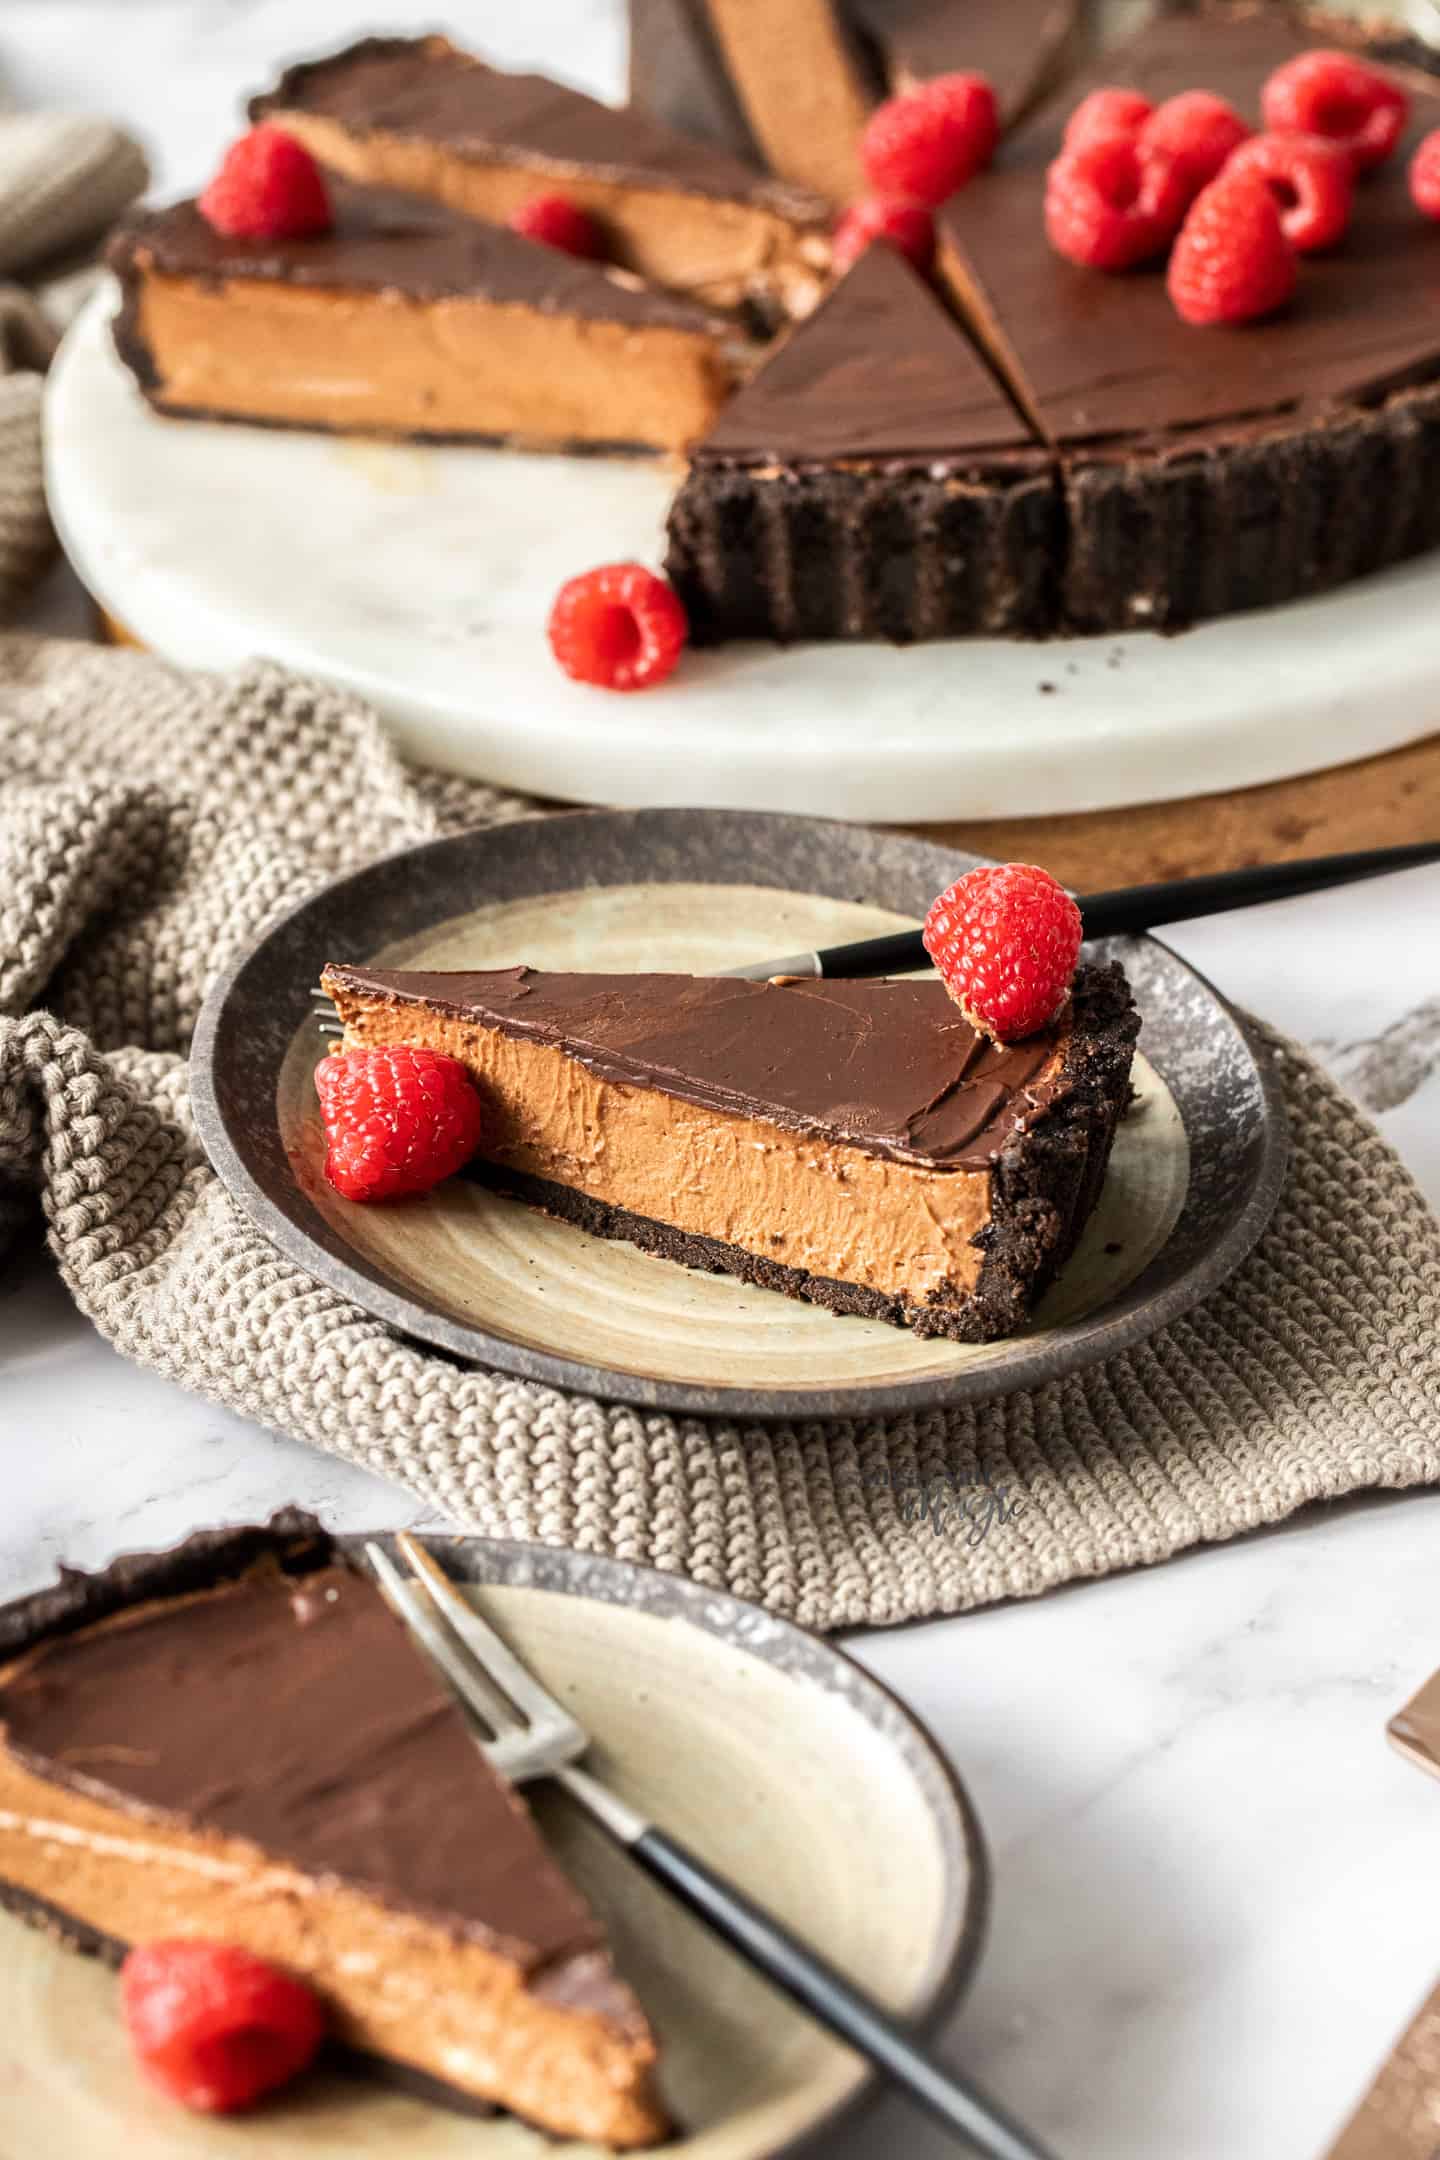 Slices ofchocolate mousse tart on brown cake plates, topped with raspberries.